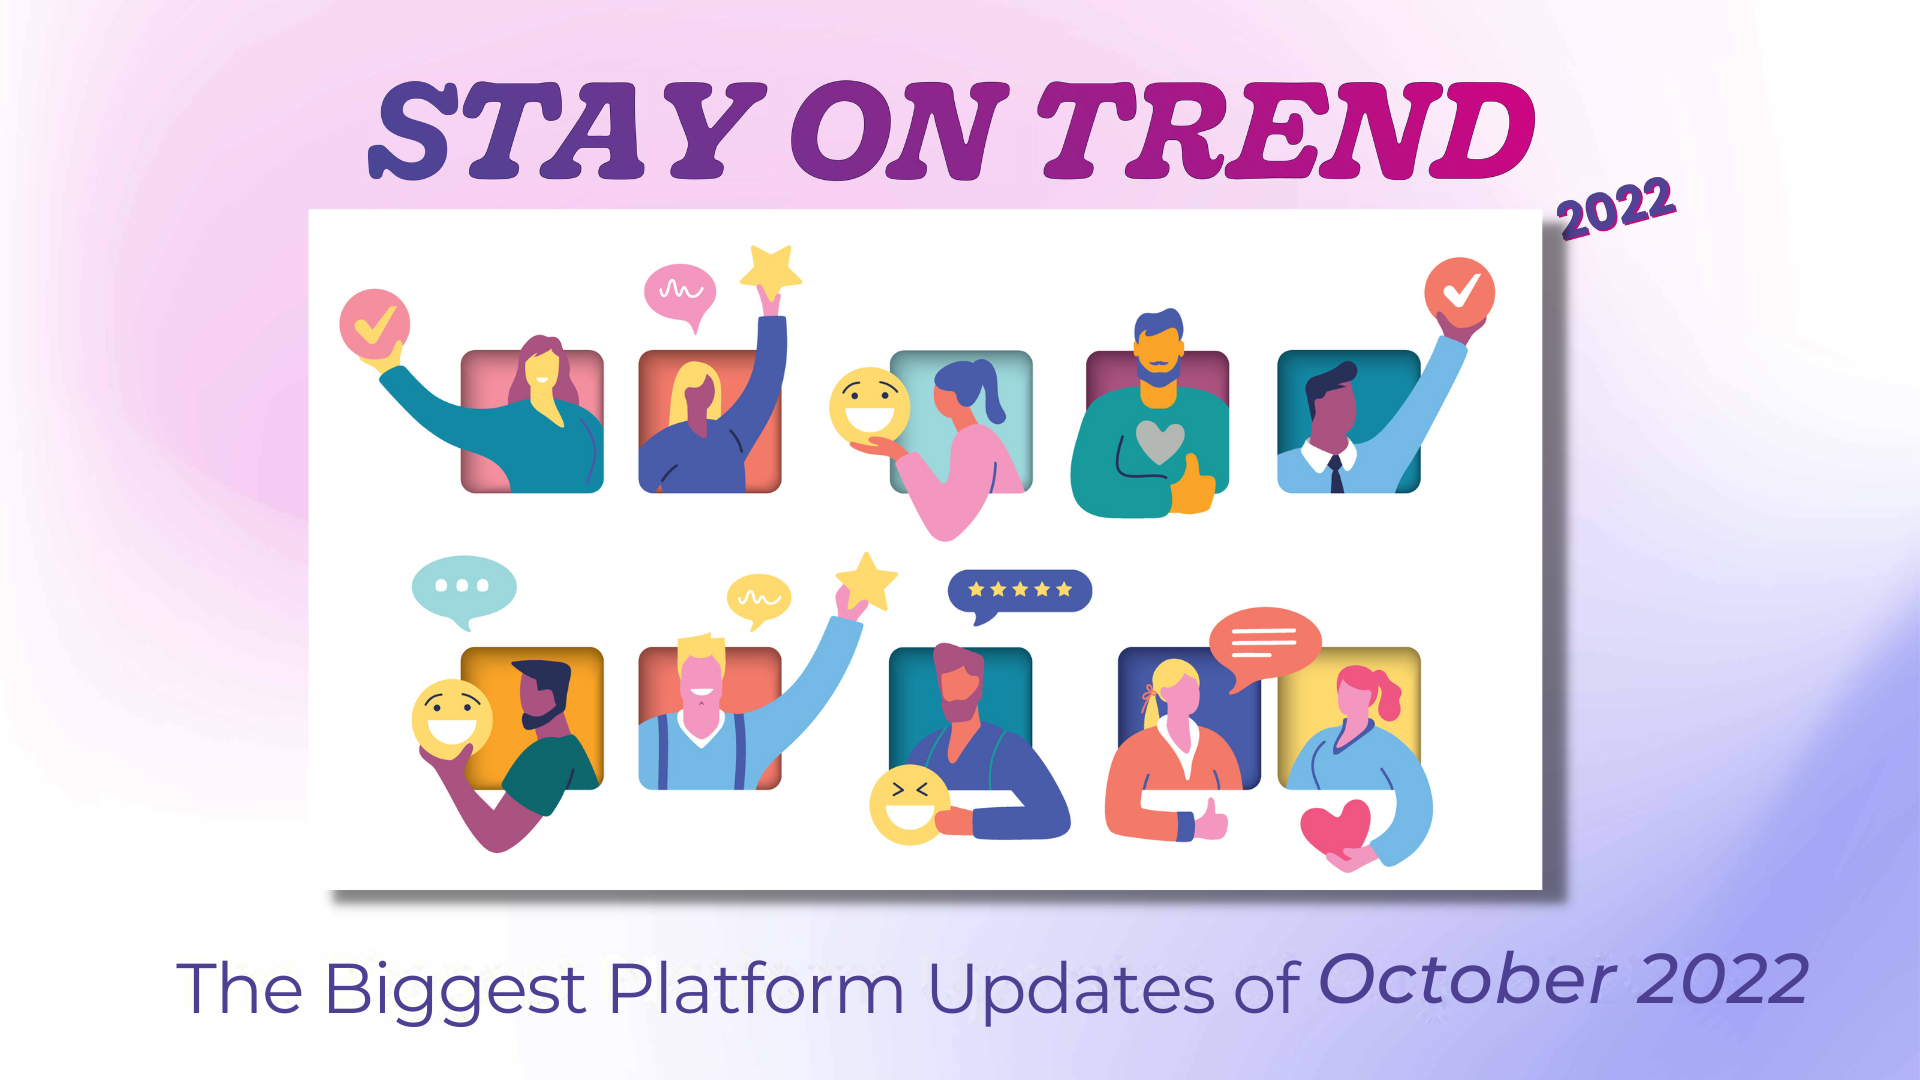 Brands and Platforms that Stay On Trend